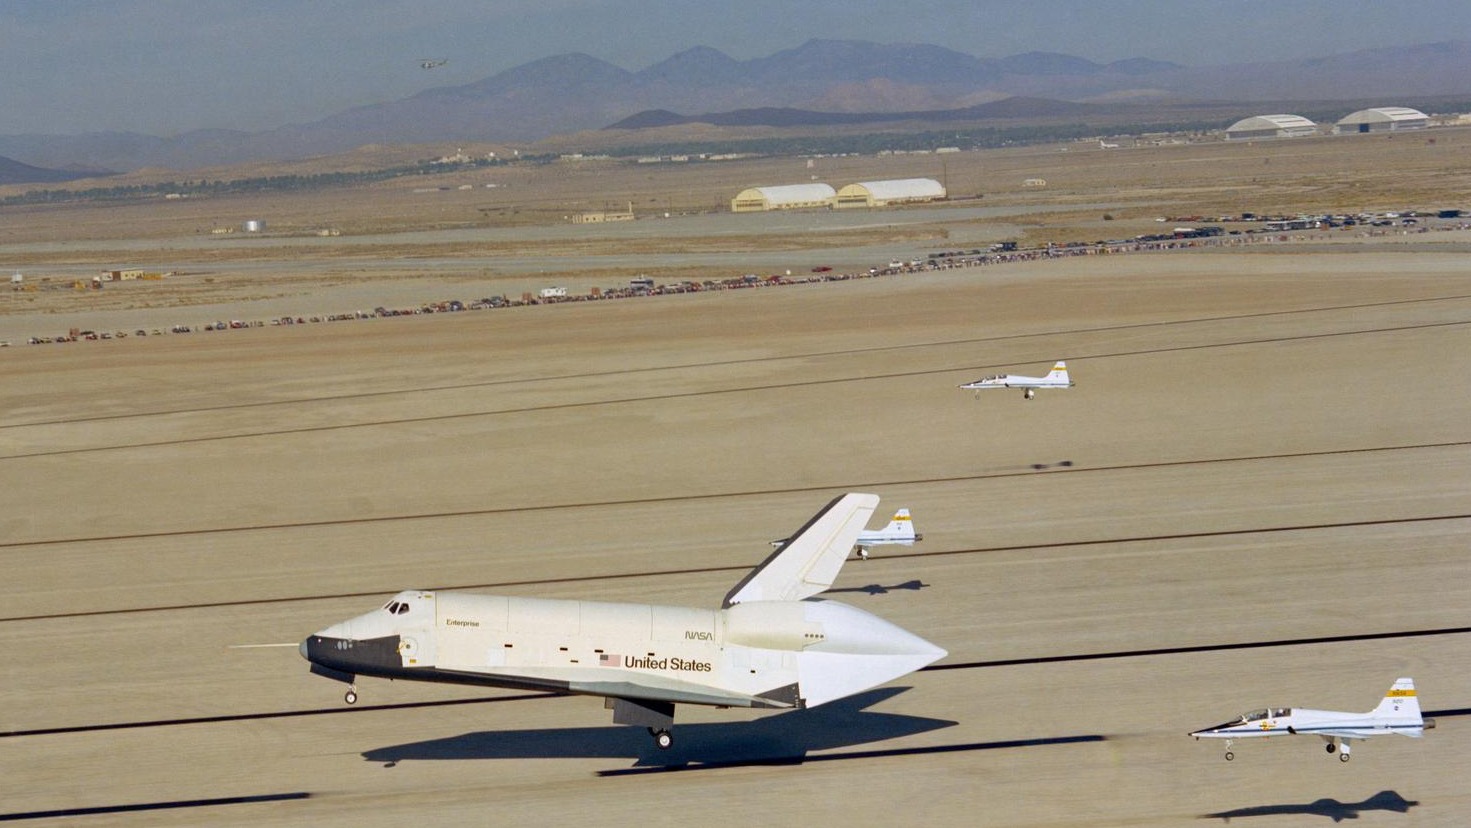 space shuttle touching down on a desert runway with three planes landing around it. mountains and buildings are in the background